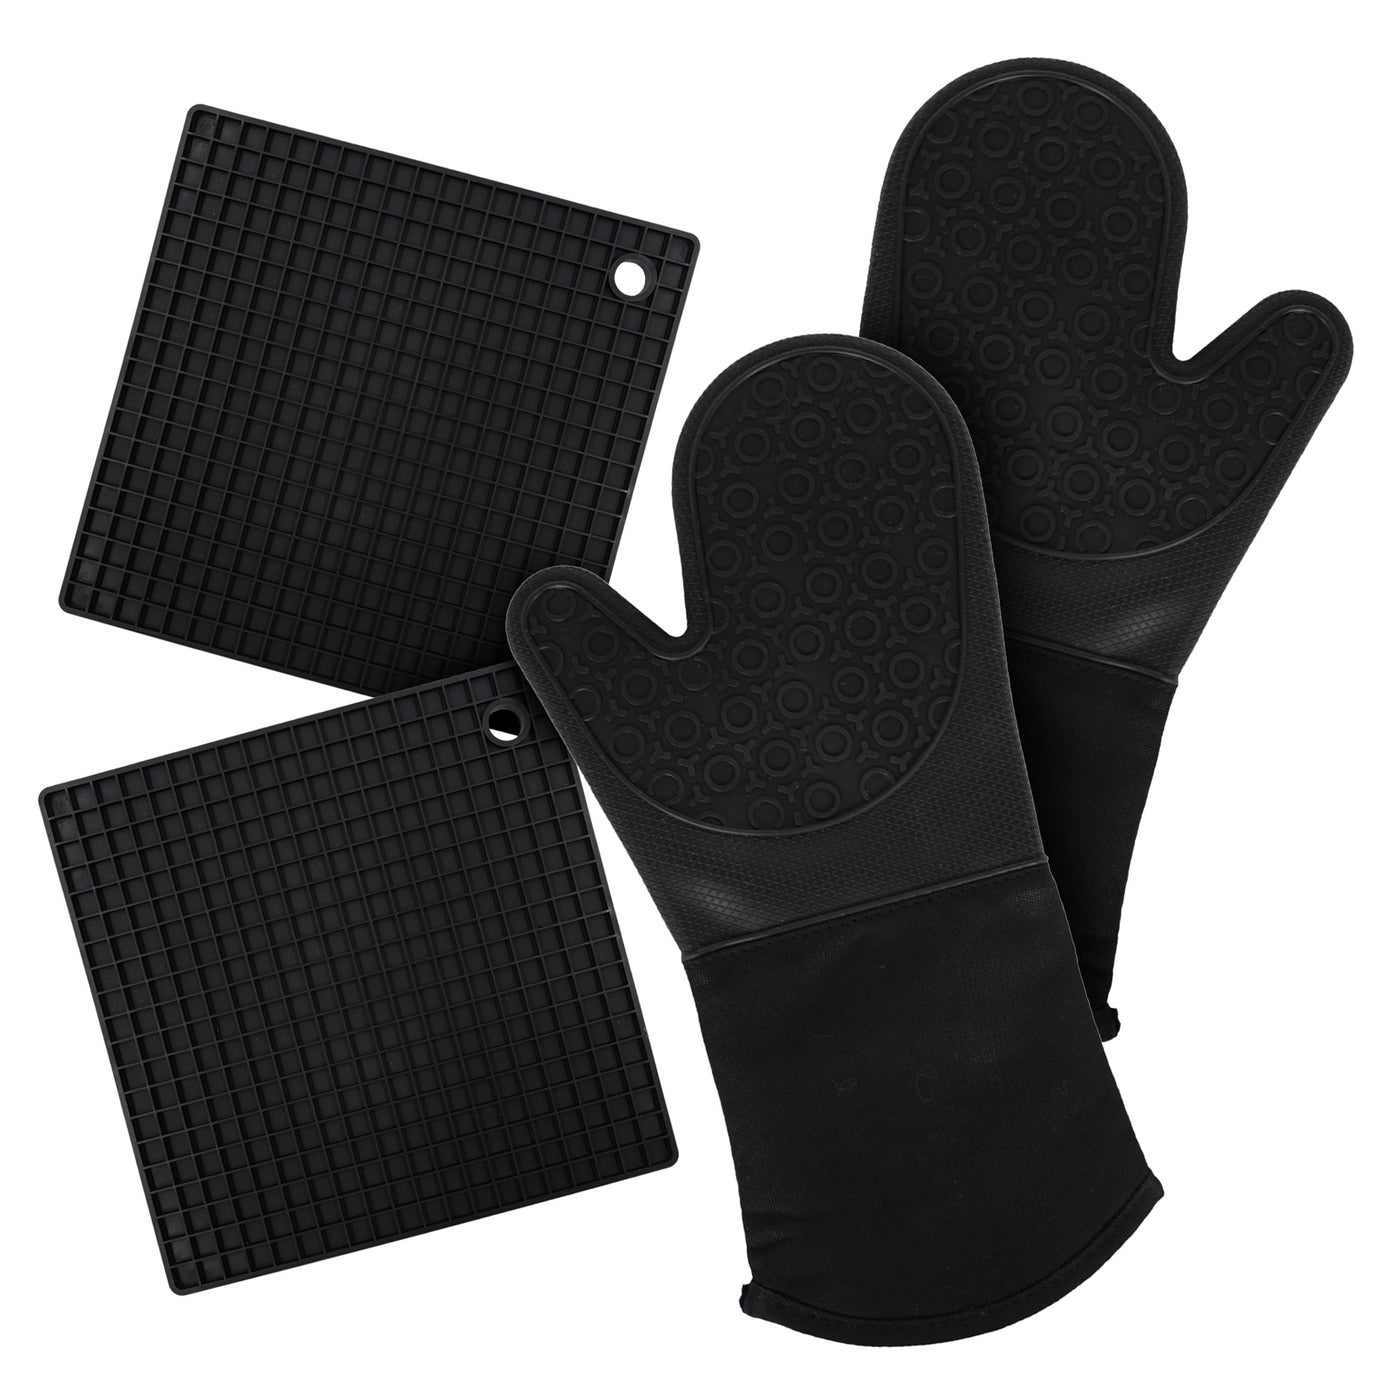 Silicone Oven Mitts and Potholders (4-Piece Set), Kitchen Counter - Advanced Heat Resistant Pot Holders, Non-Slip Textured Grip Oven Mitt - Black